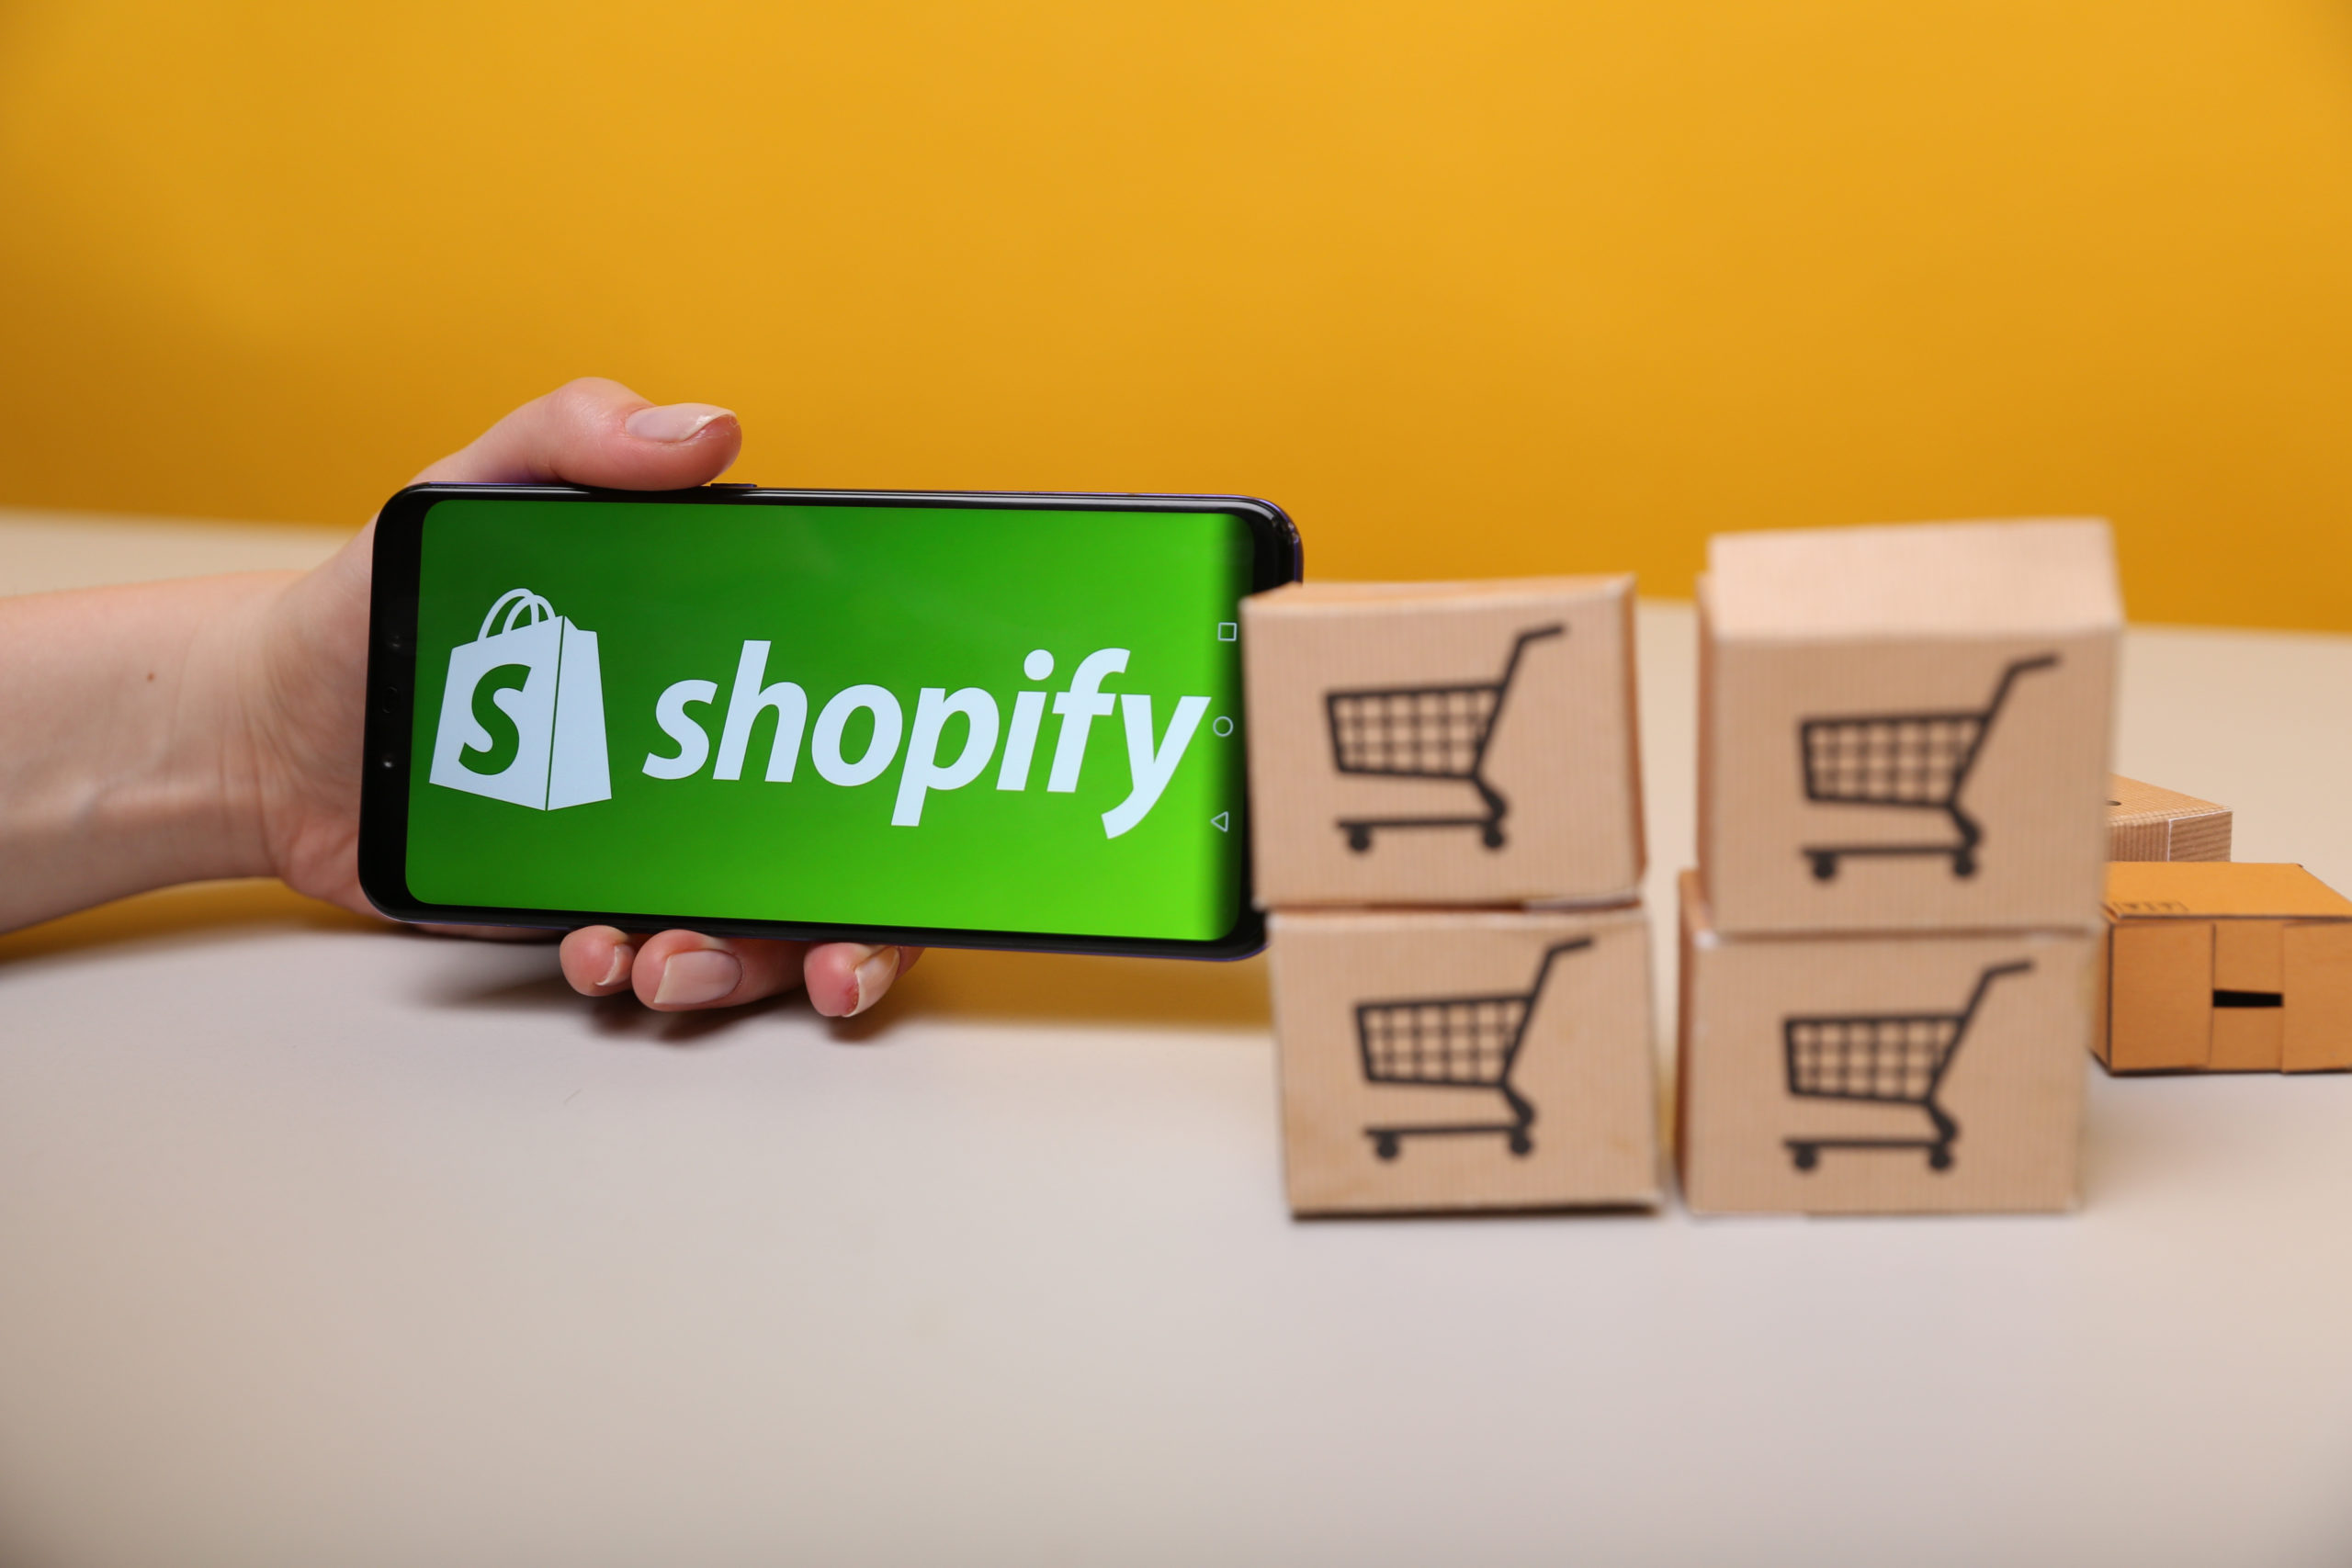 Shopify expands crypto payment options after Crypto.com deal